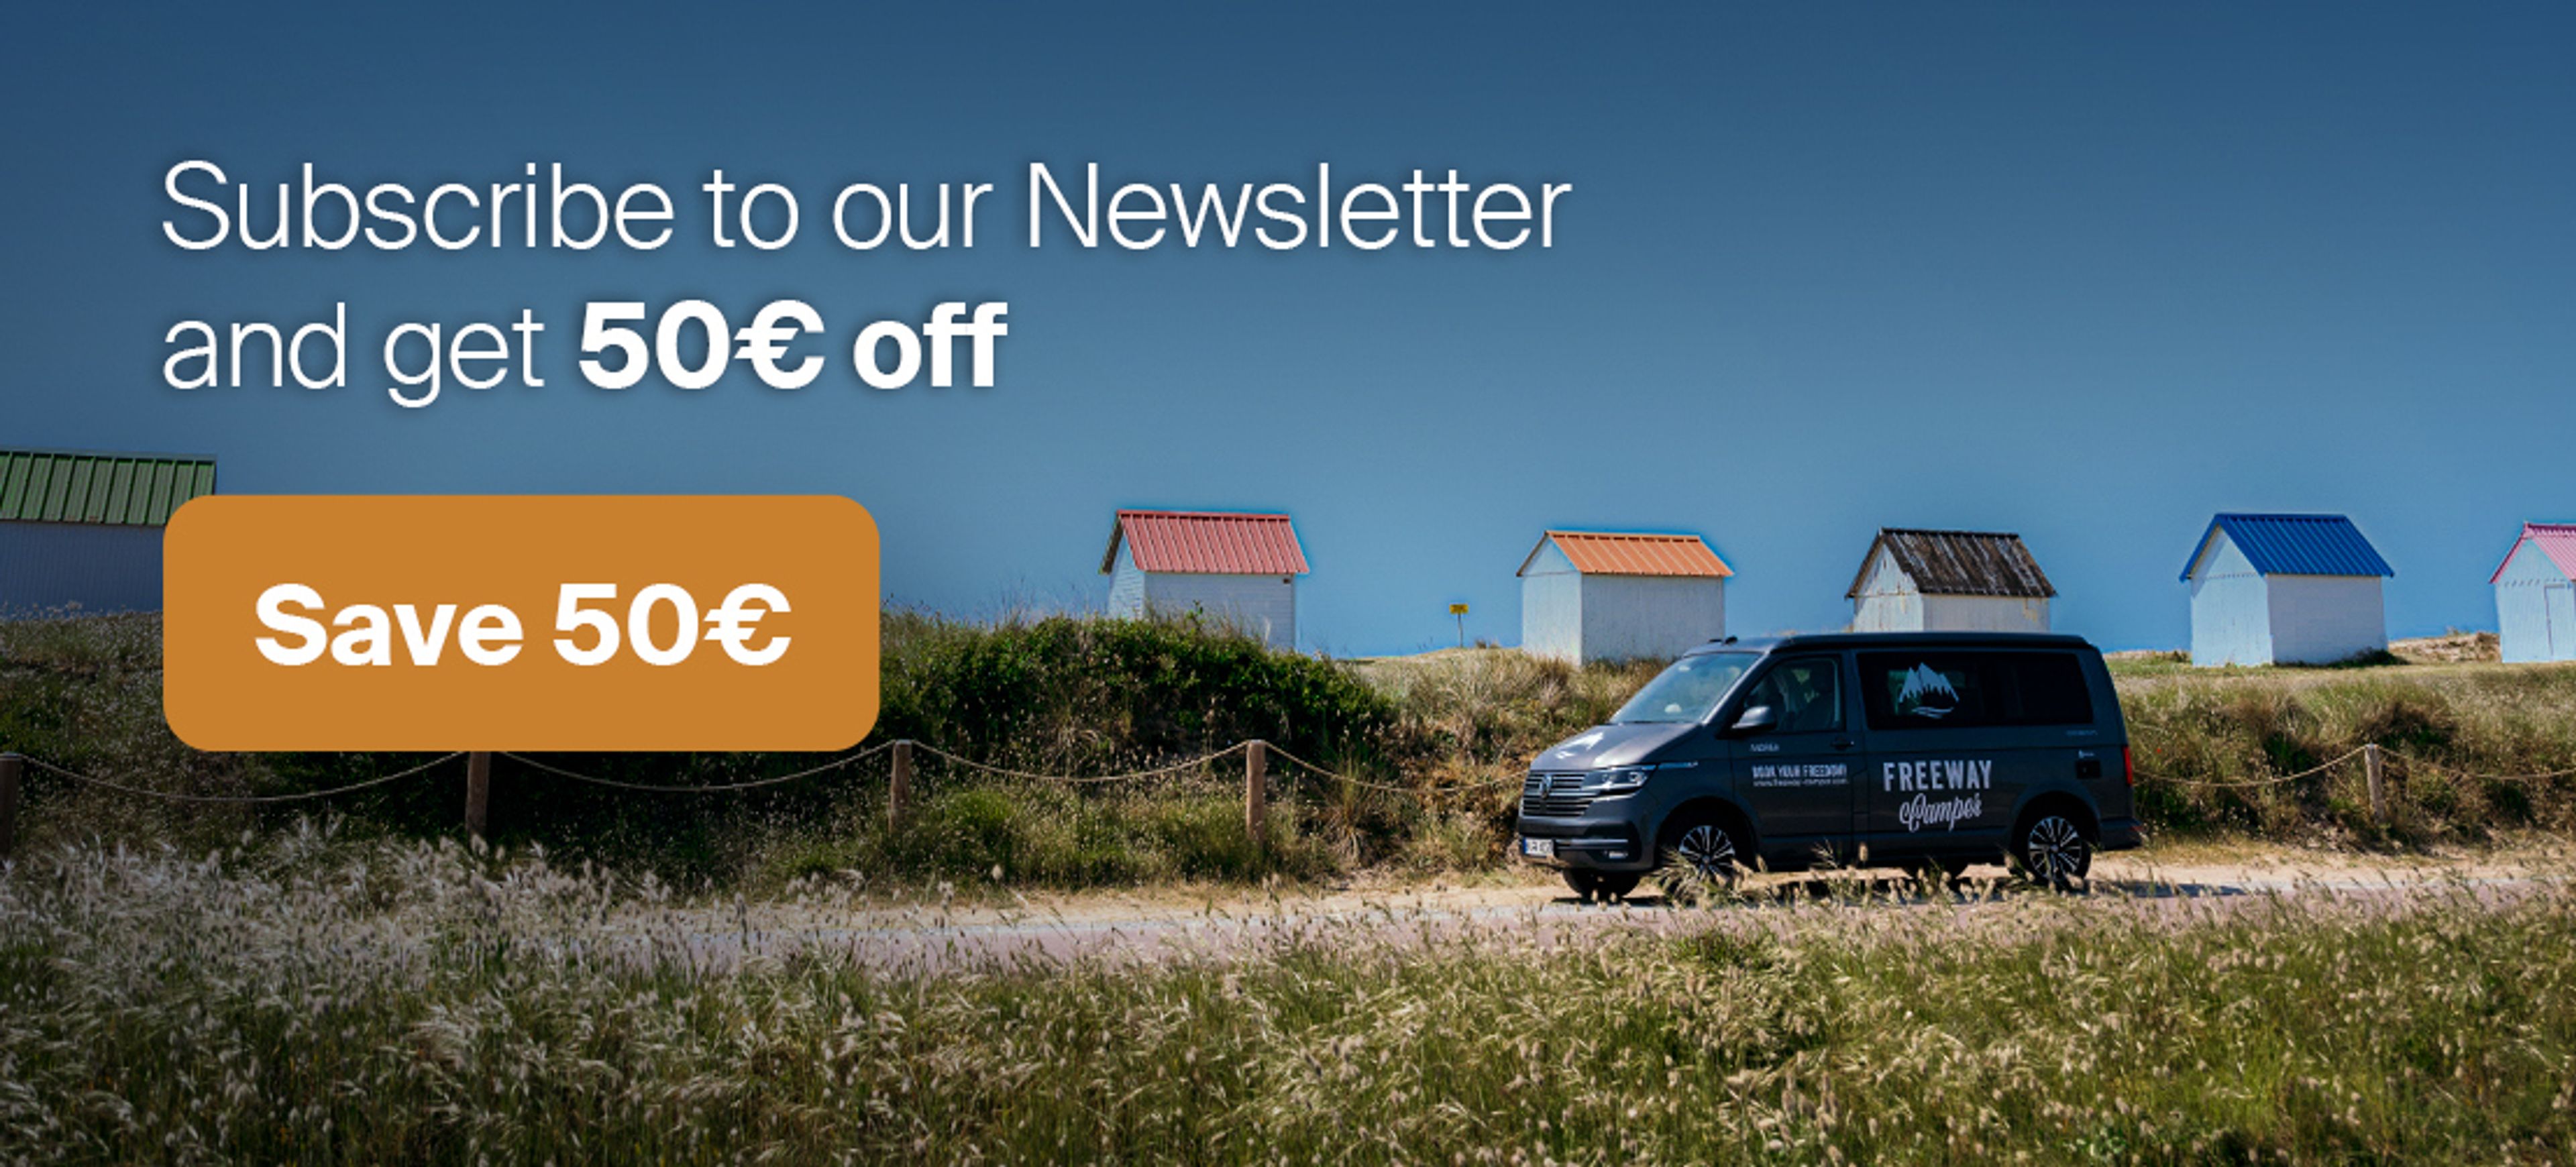 Join our newsletter and save 50€ - VW Bulli California Ocean in Normandy, France